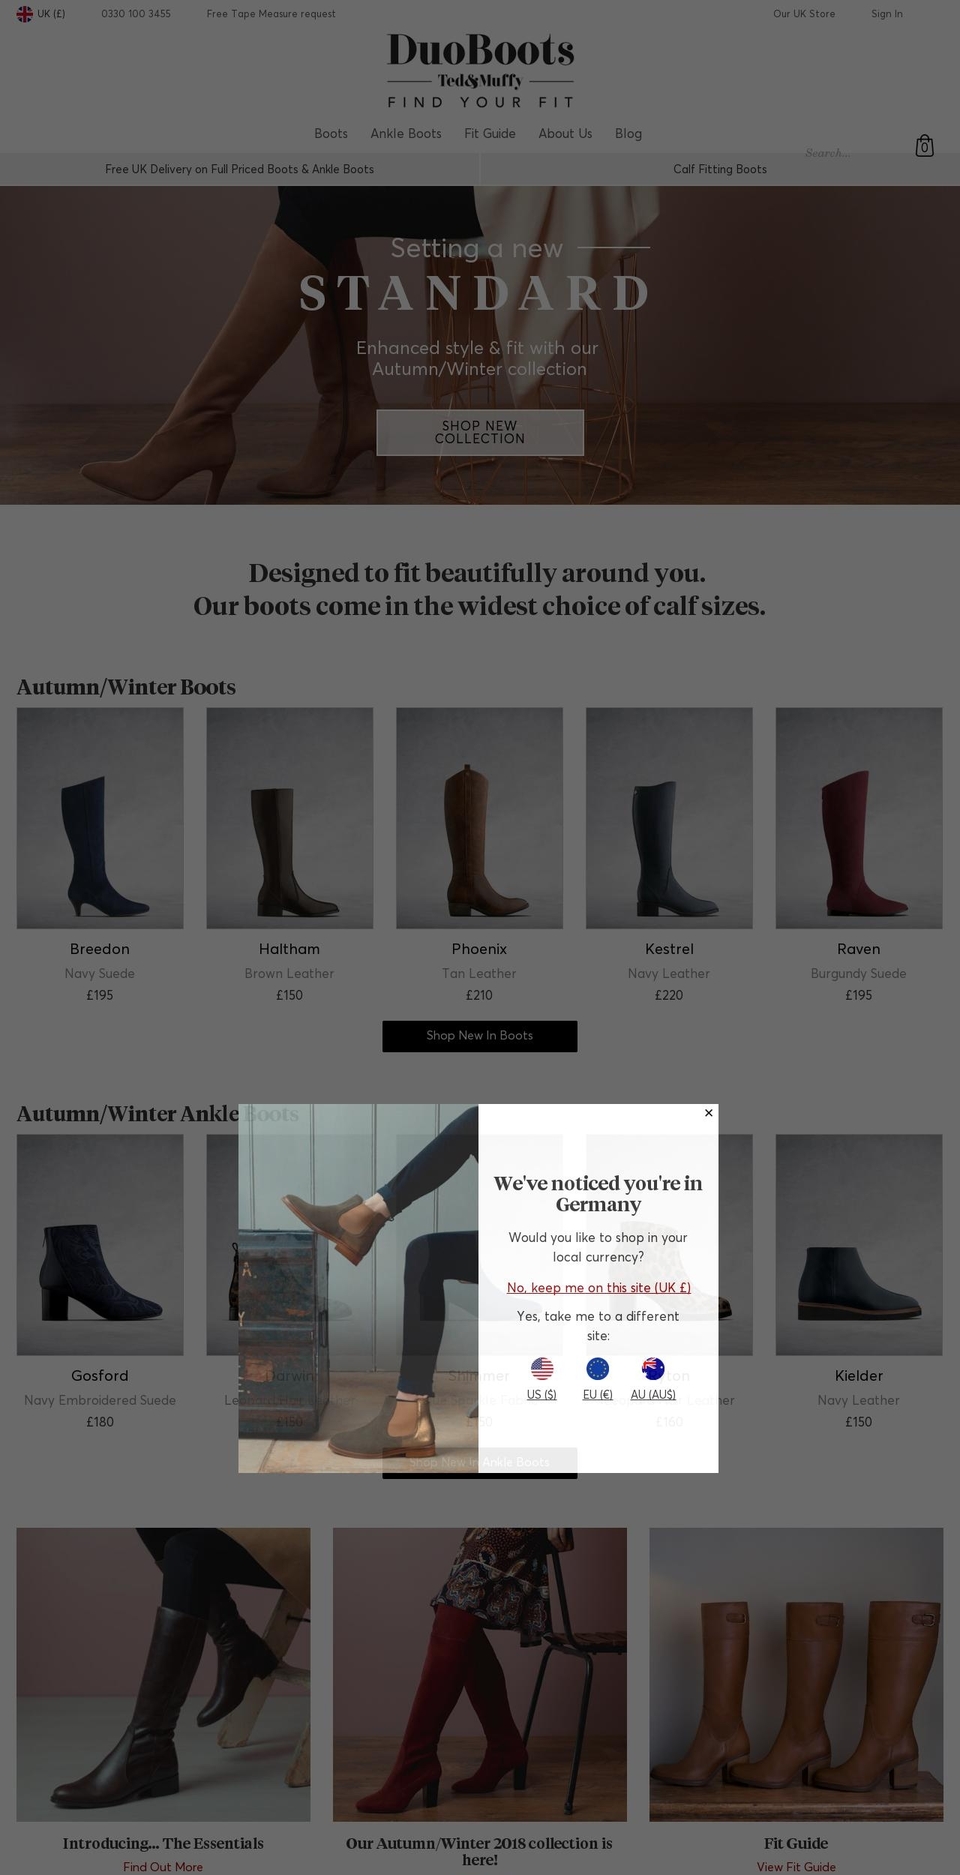 DuoBoots GBP V4.0 Shopify theme site example duoboots.tv